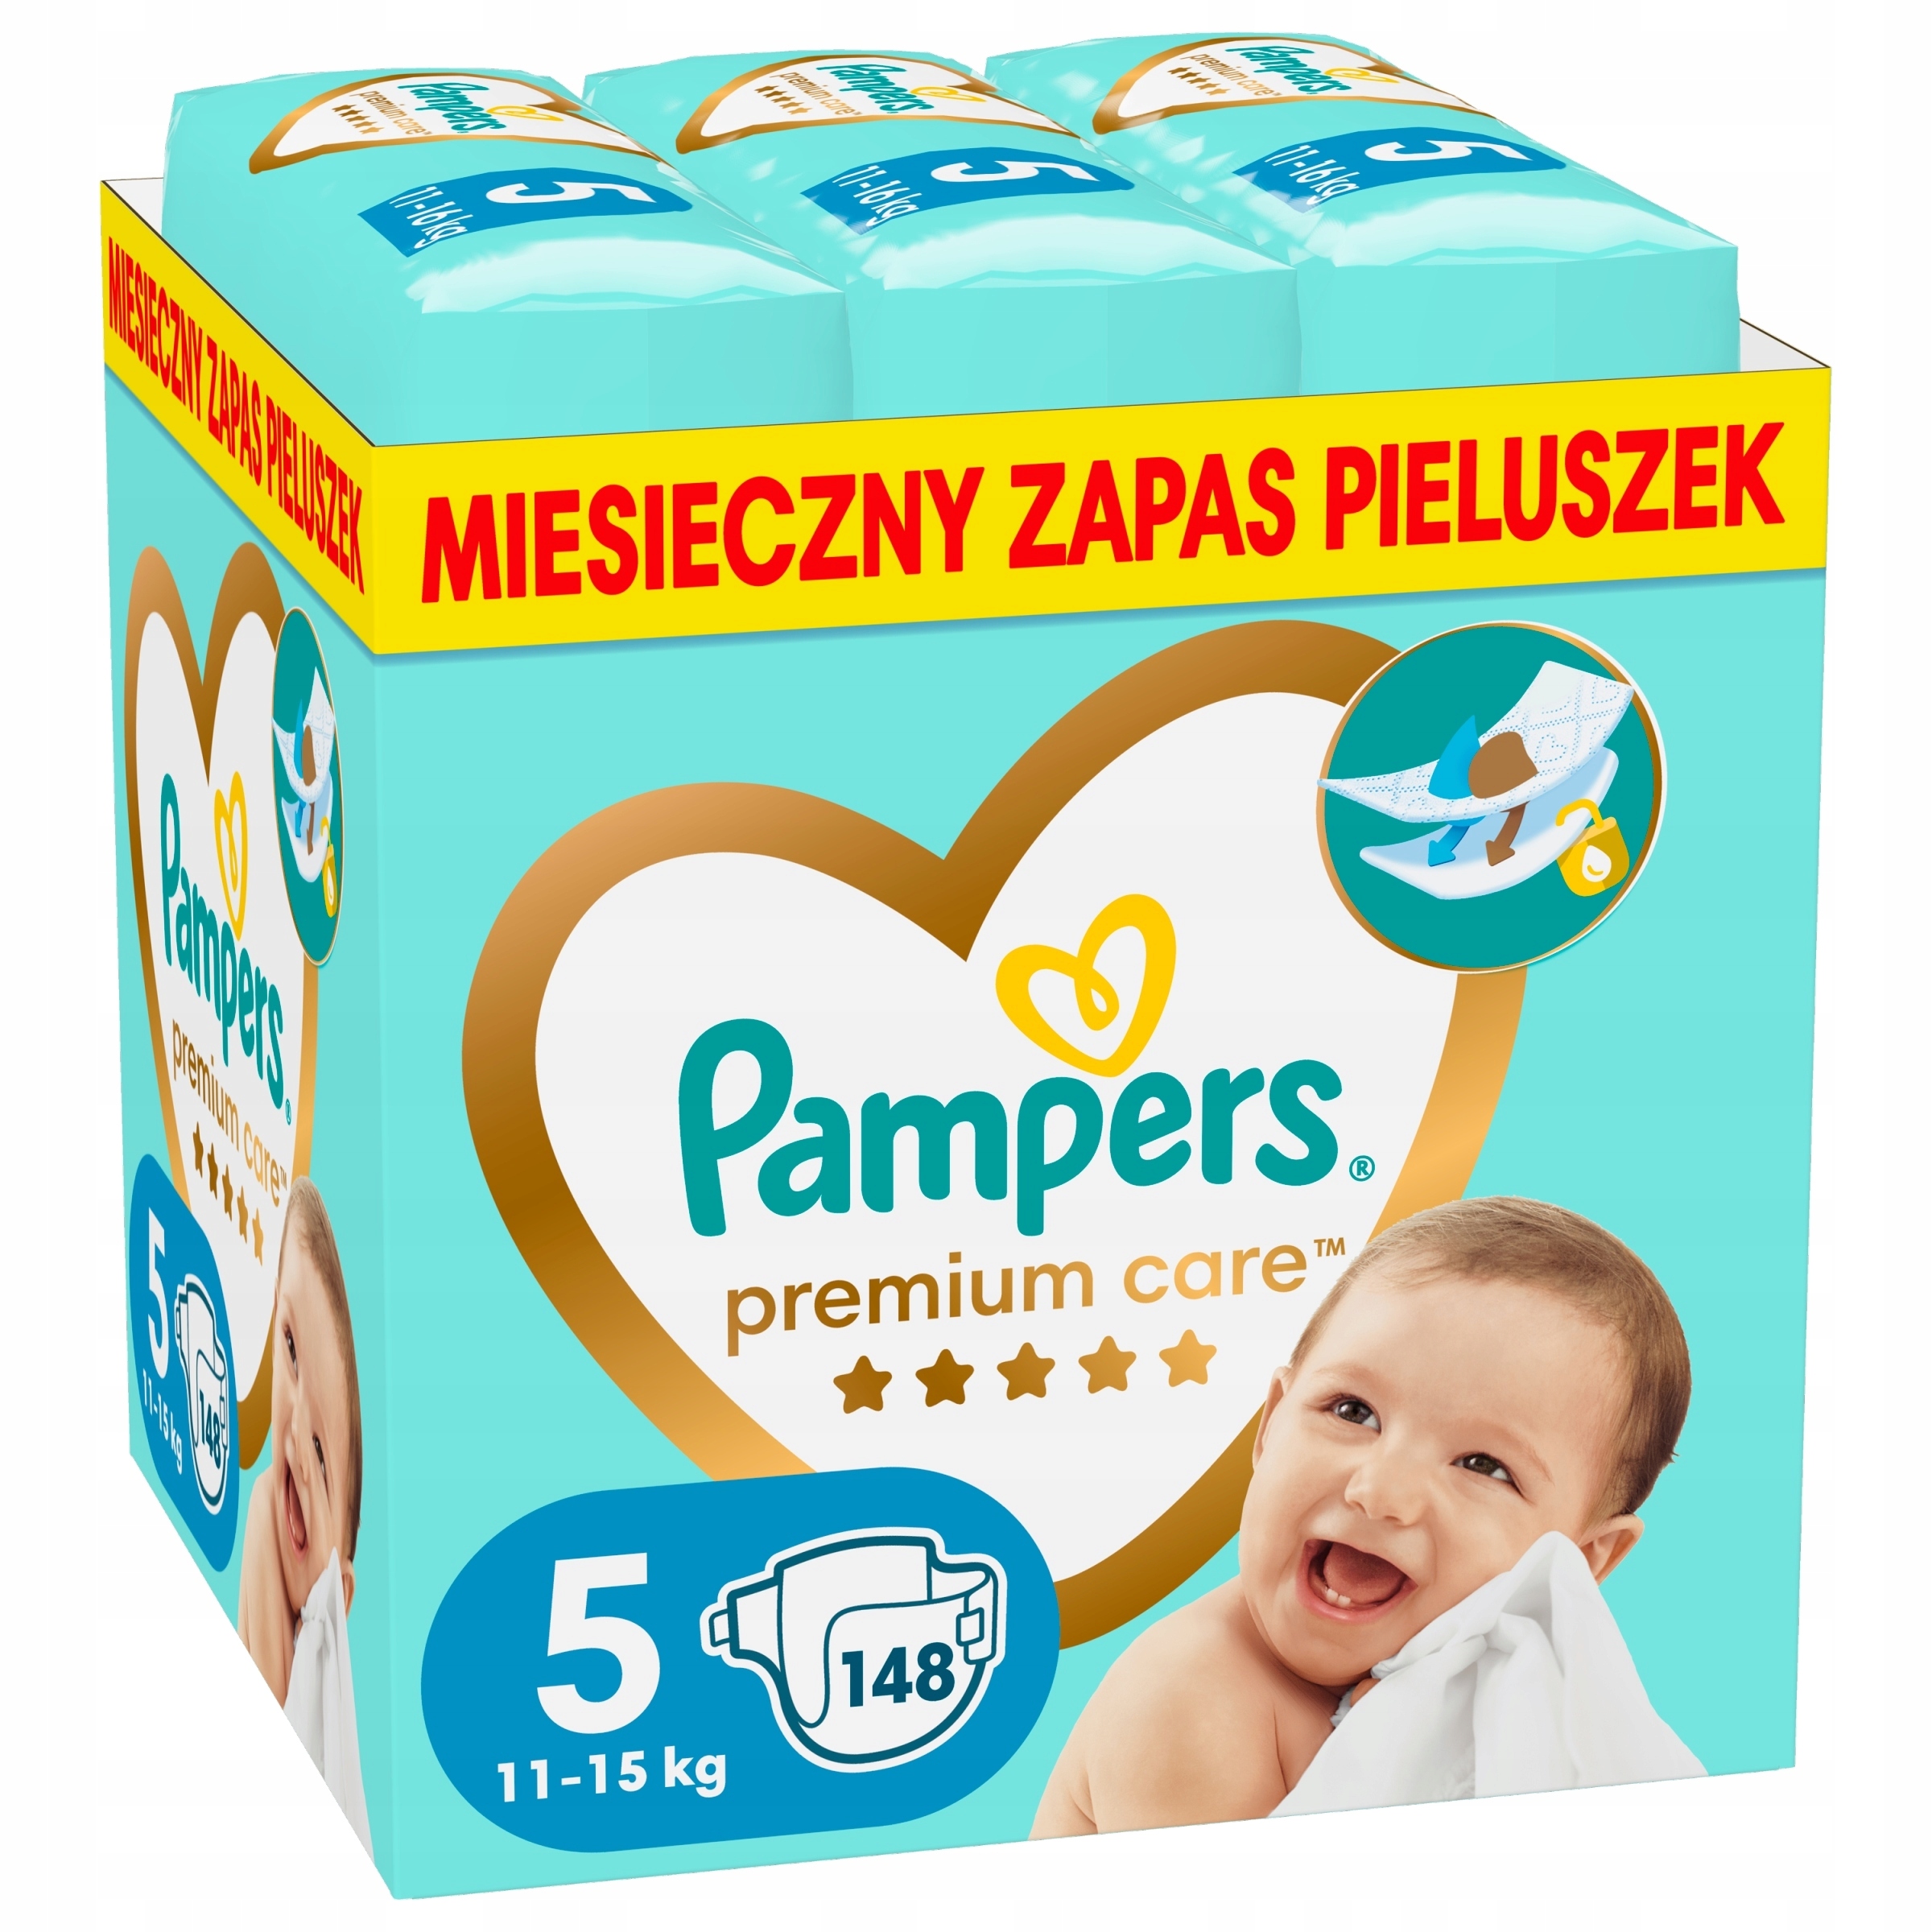 pampers 4 active baby night